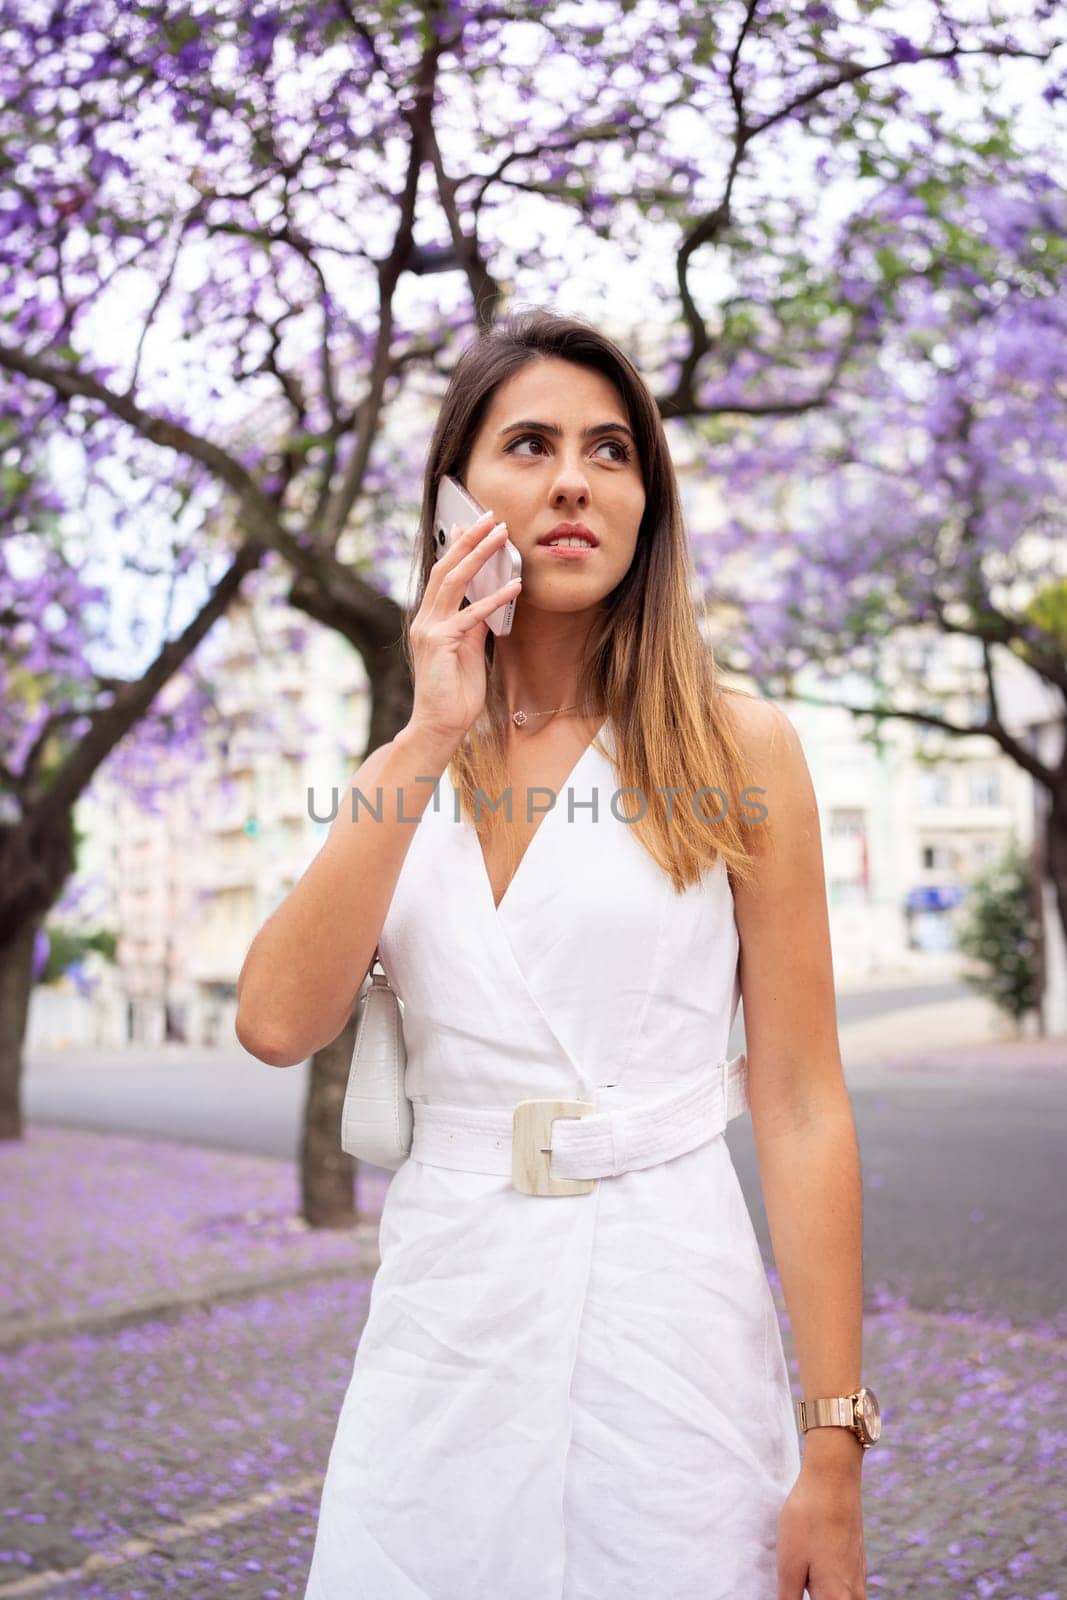 Woman in white dress uses cellphone outdoors. Female making call in city park. Fashionable female wearing white summer dress stands outdoors with violet Jacaranda trees in background.